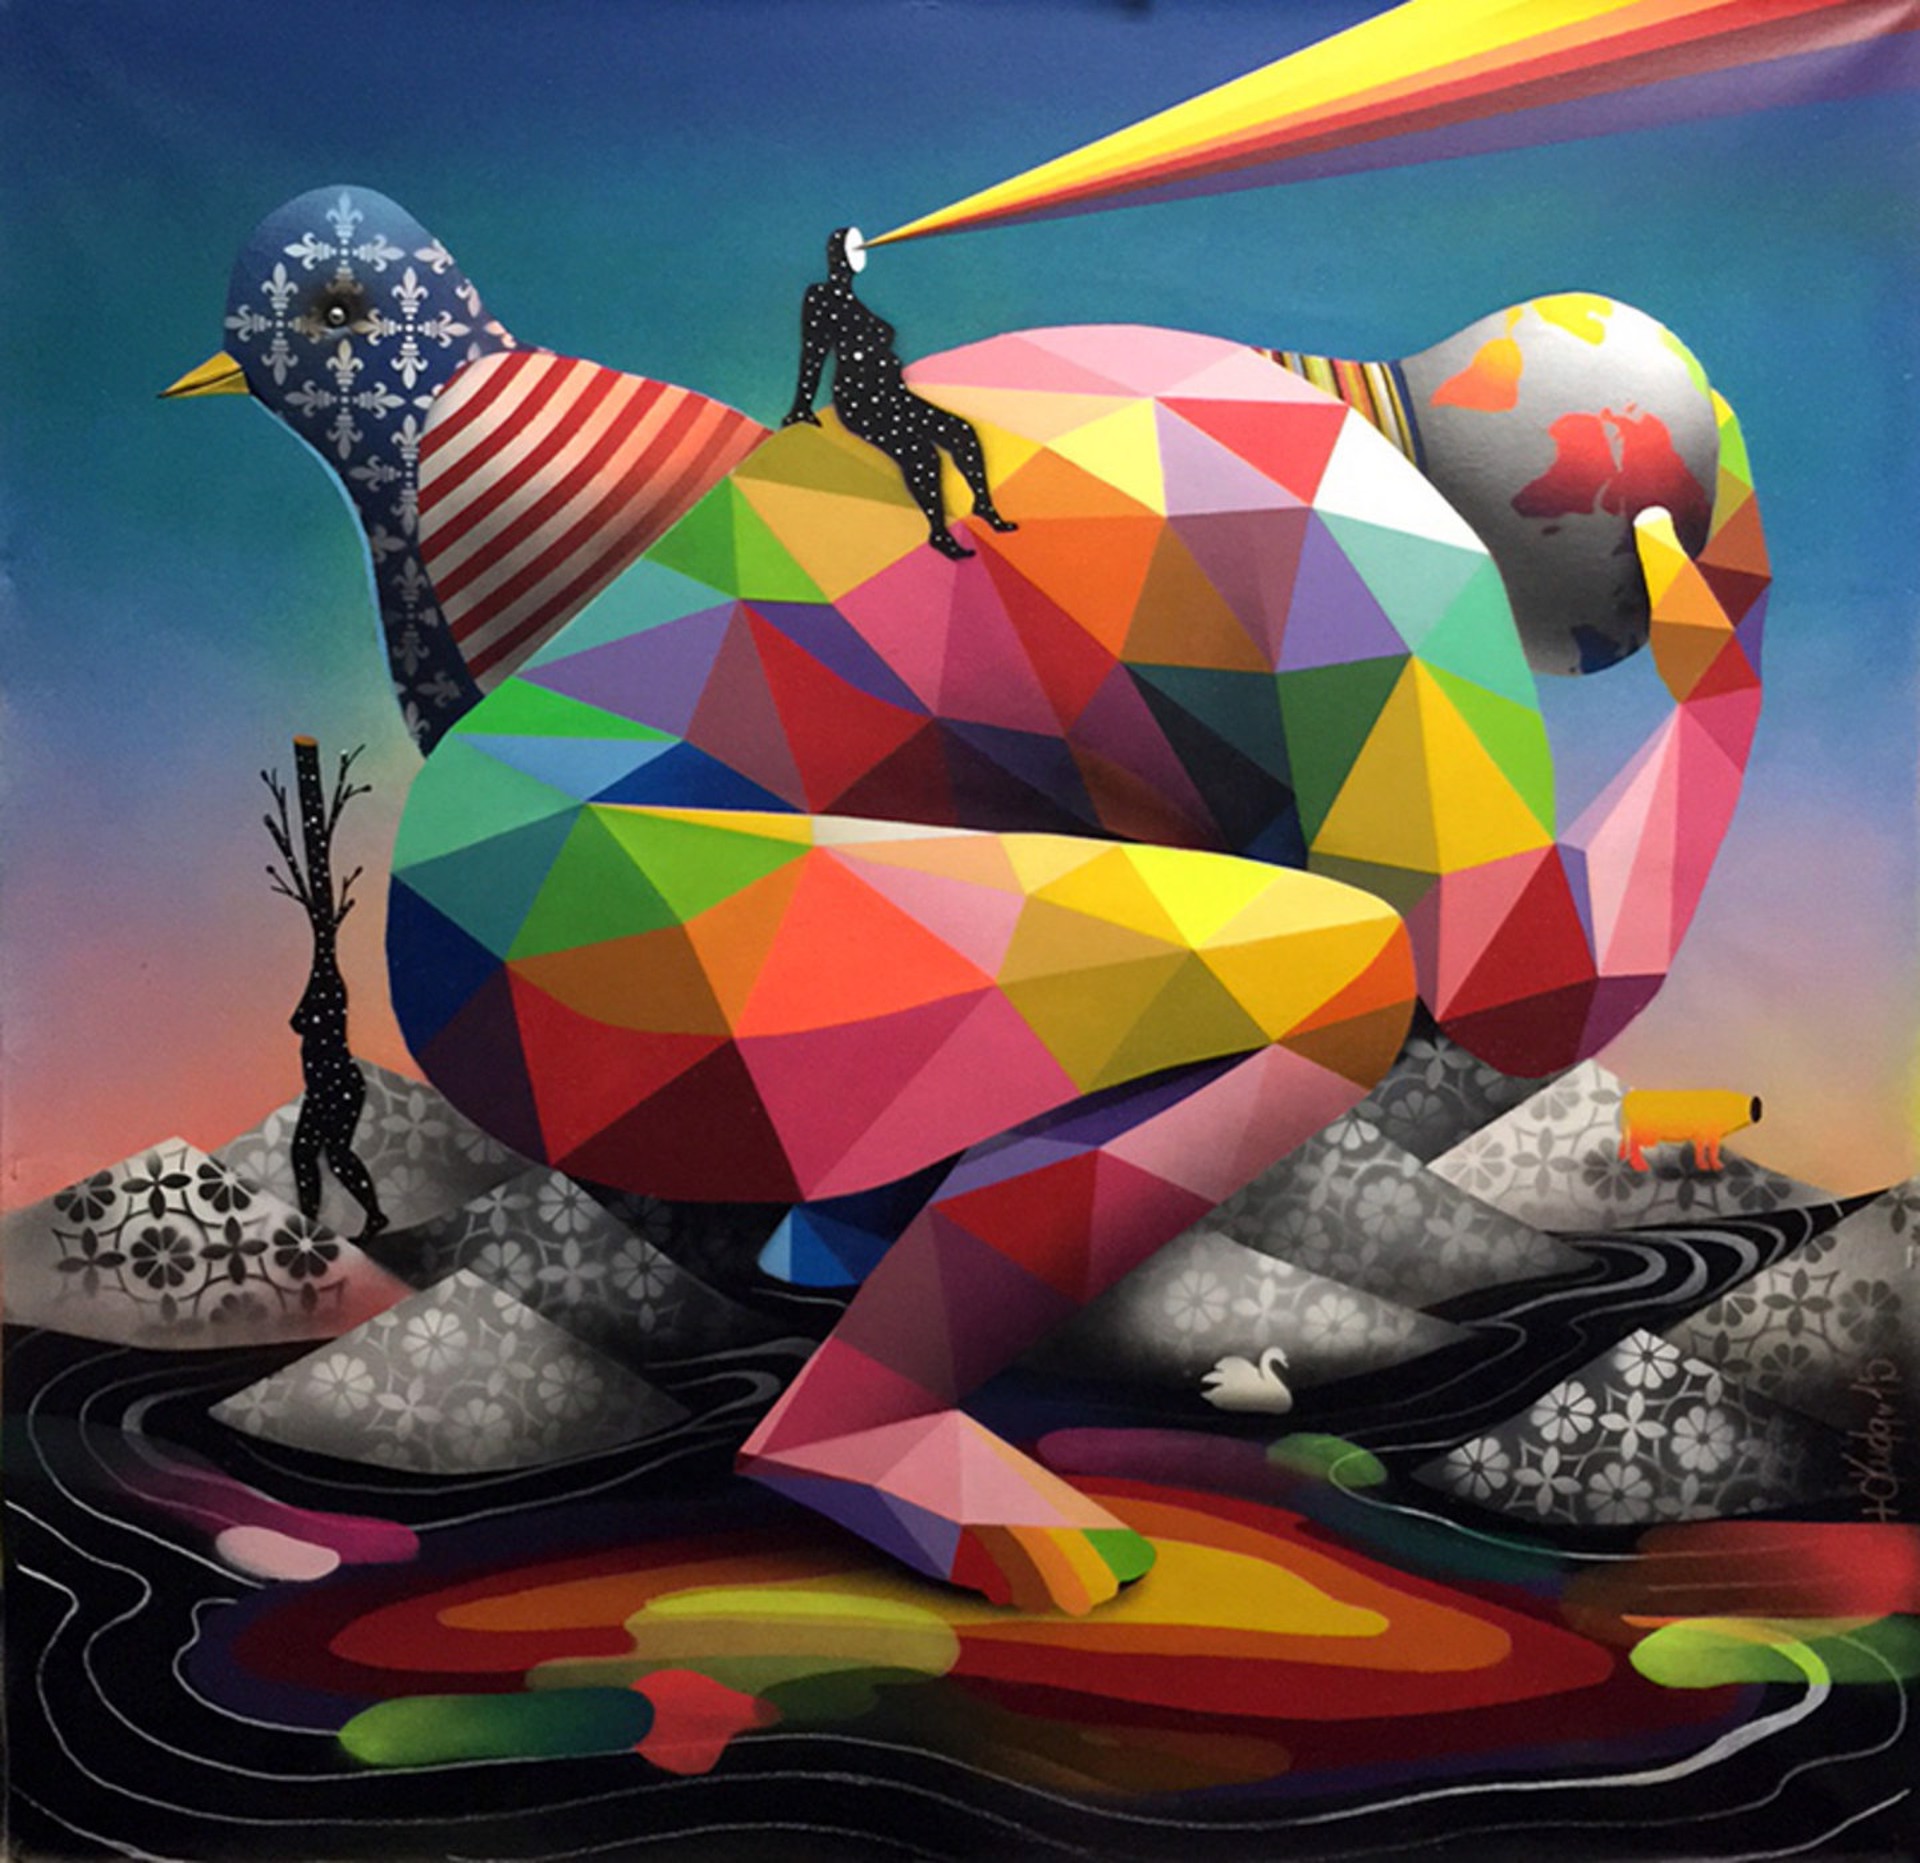 Reflections of God by Okuda San Miguel